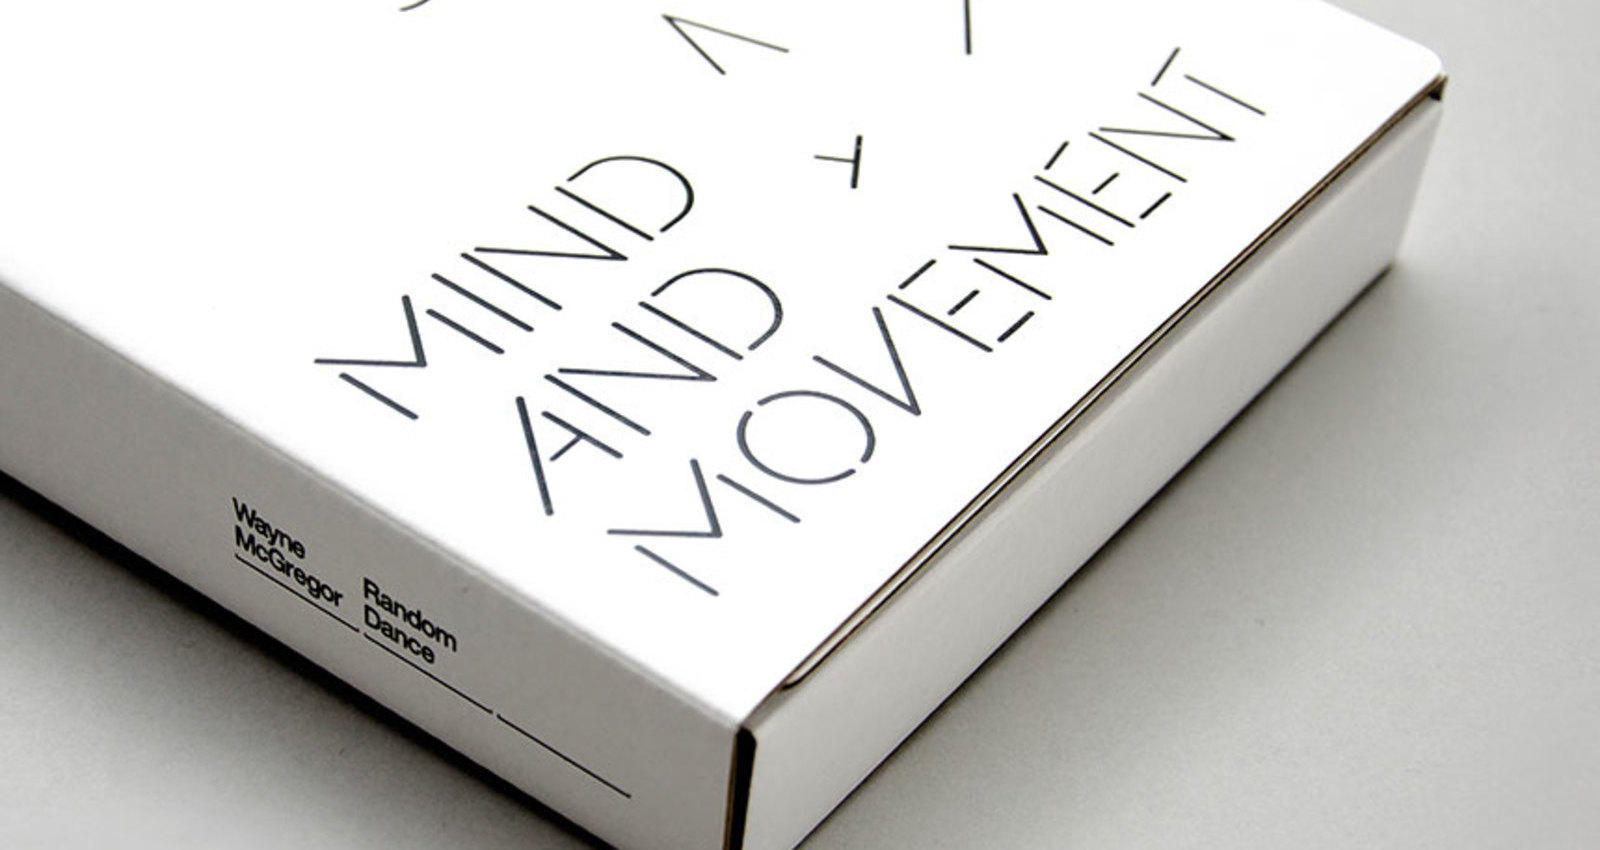 Mind and Movement